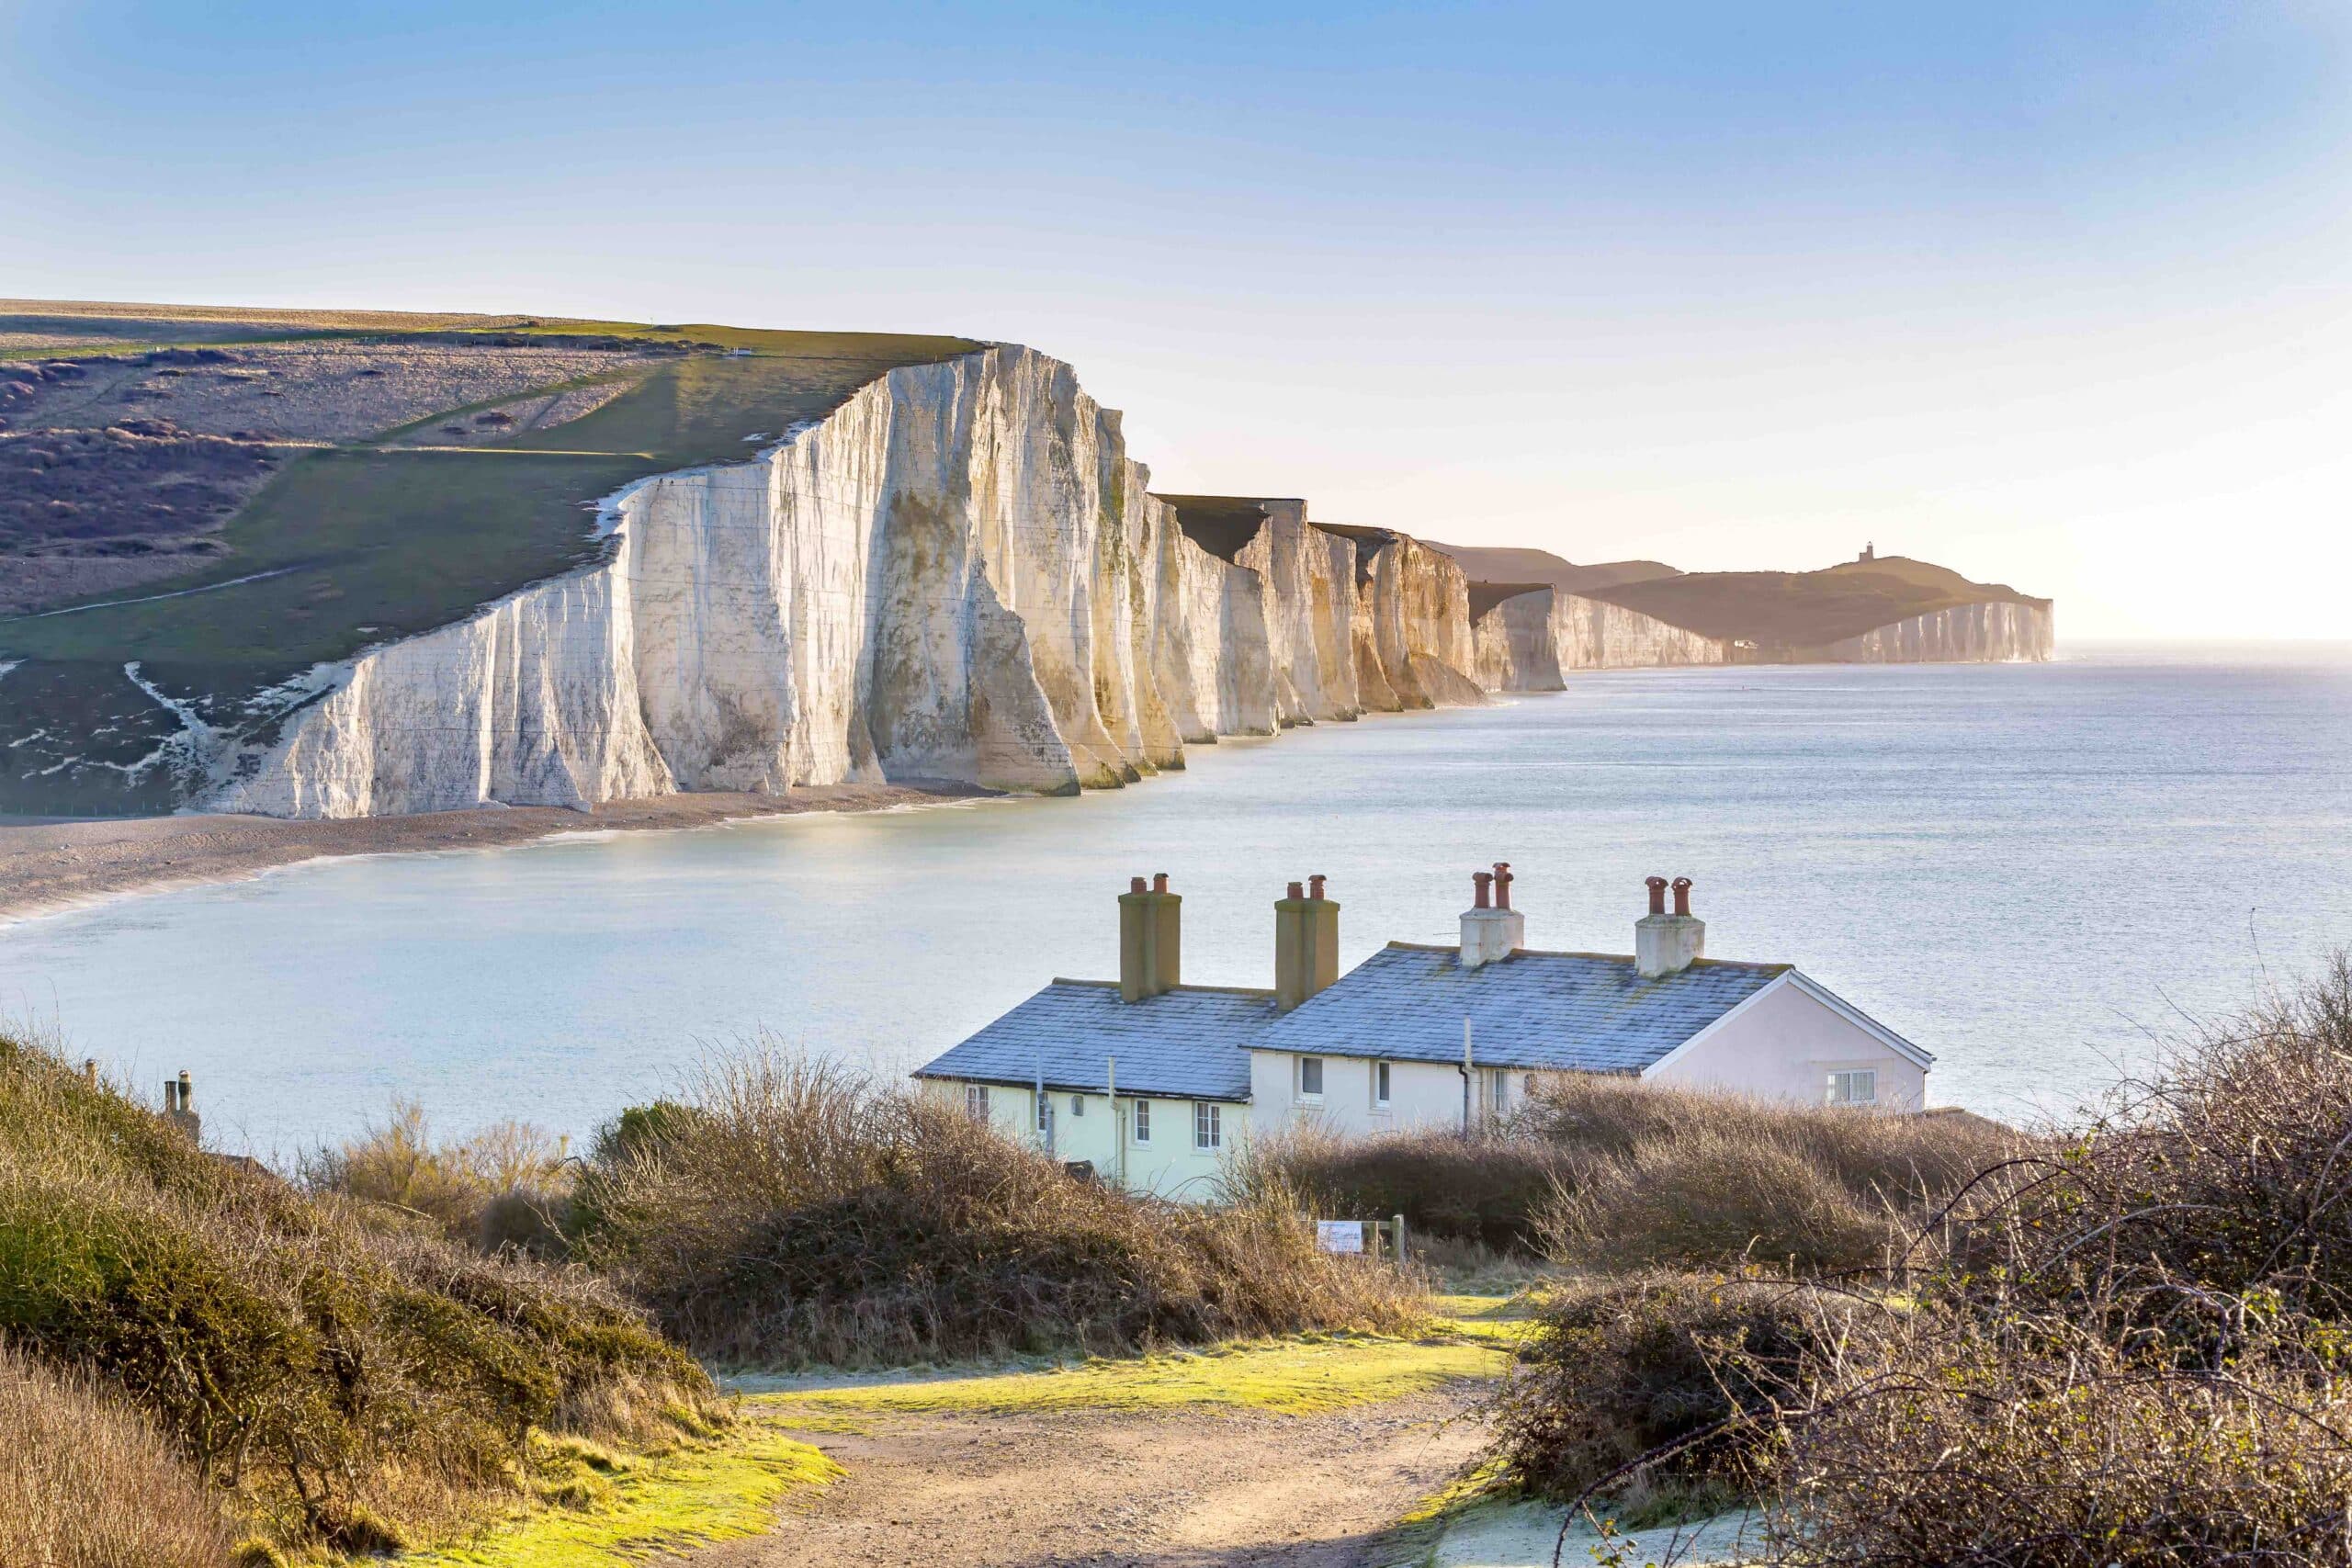 The Coast Guard Cottages in foreground; Seven Sisters Chalk Cliffs just outside Eastbourne in the rear on a bright clear spring day, Sussex, England.